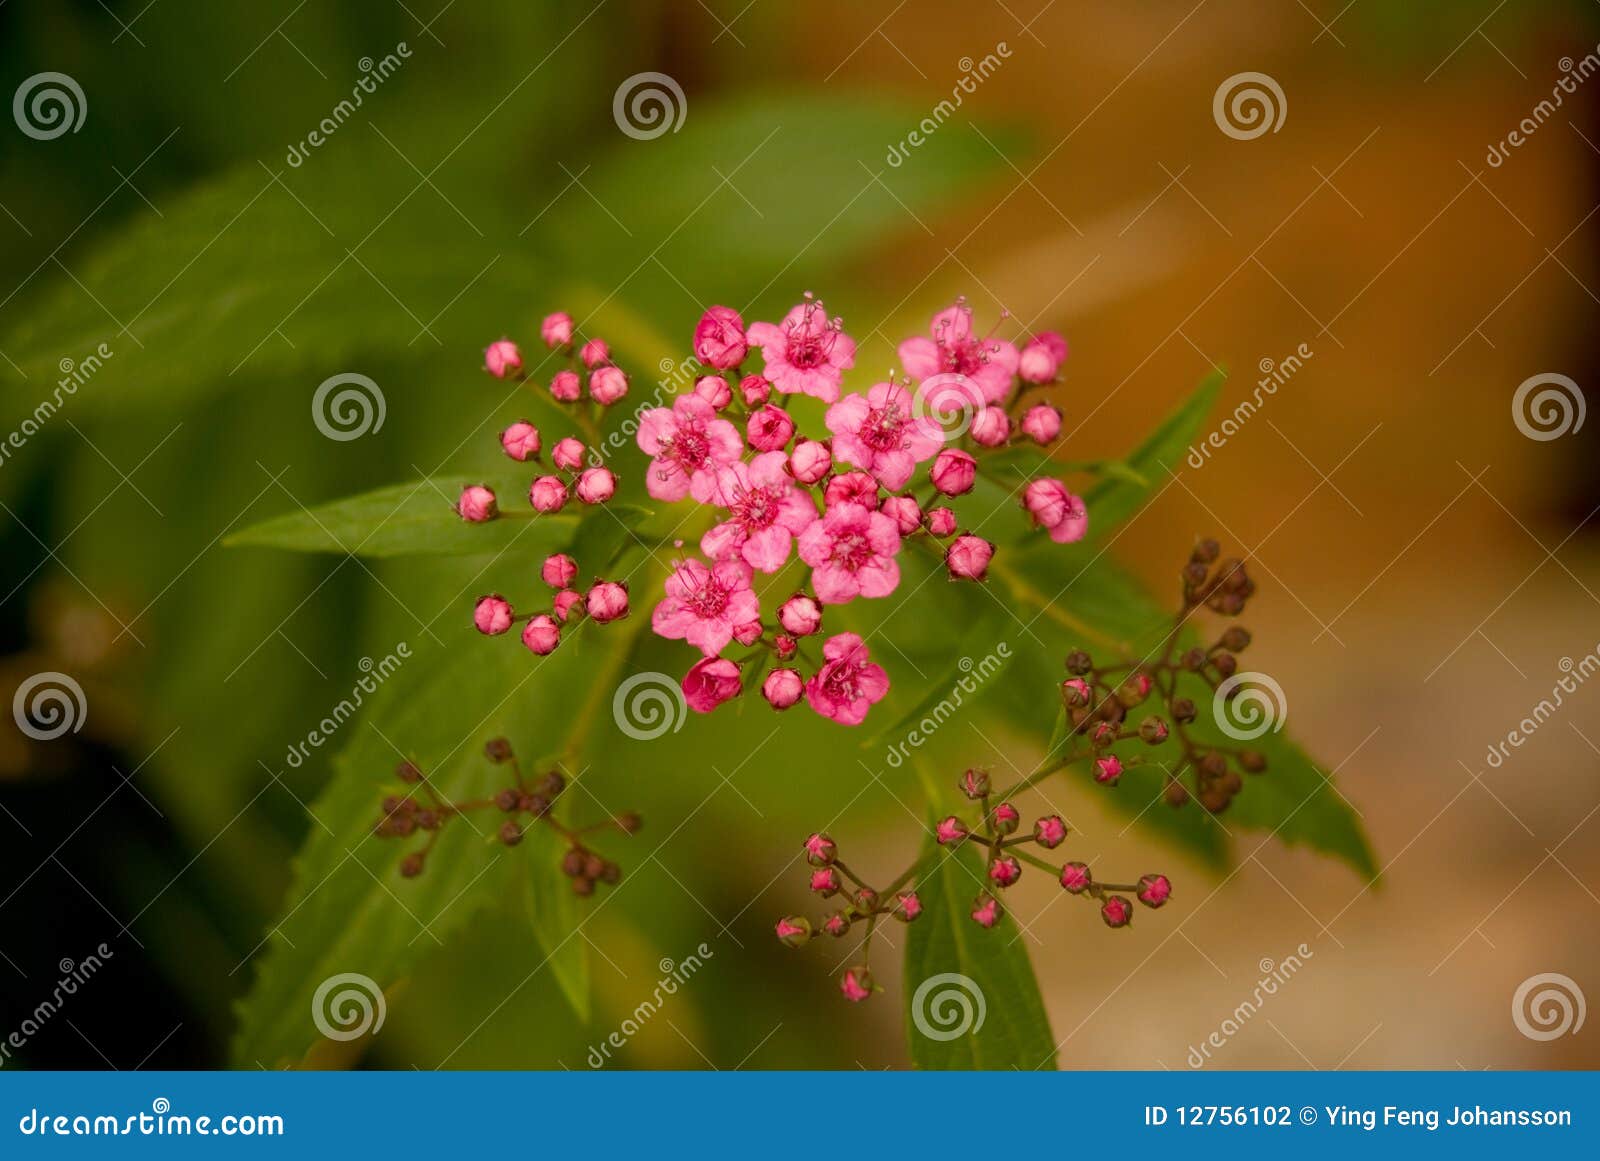 flowers and buds of spirea